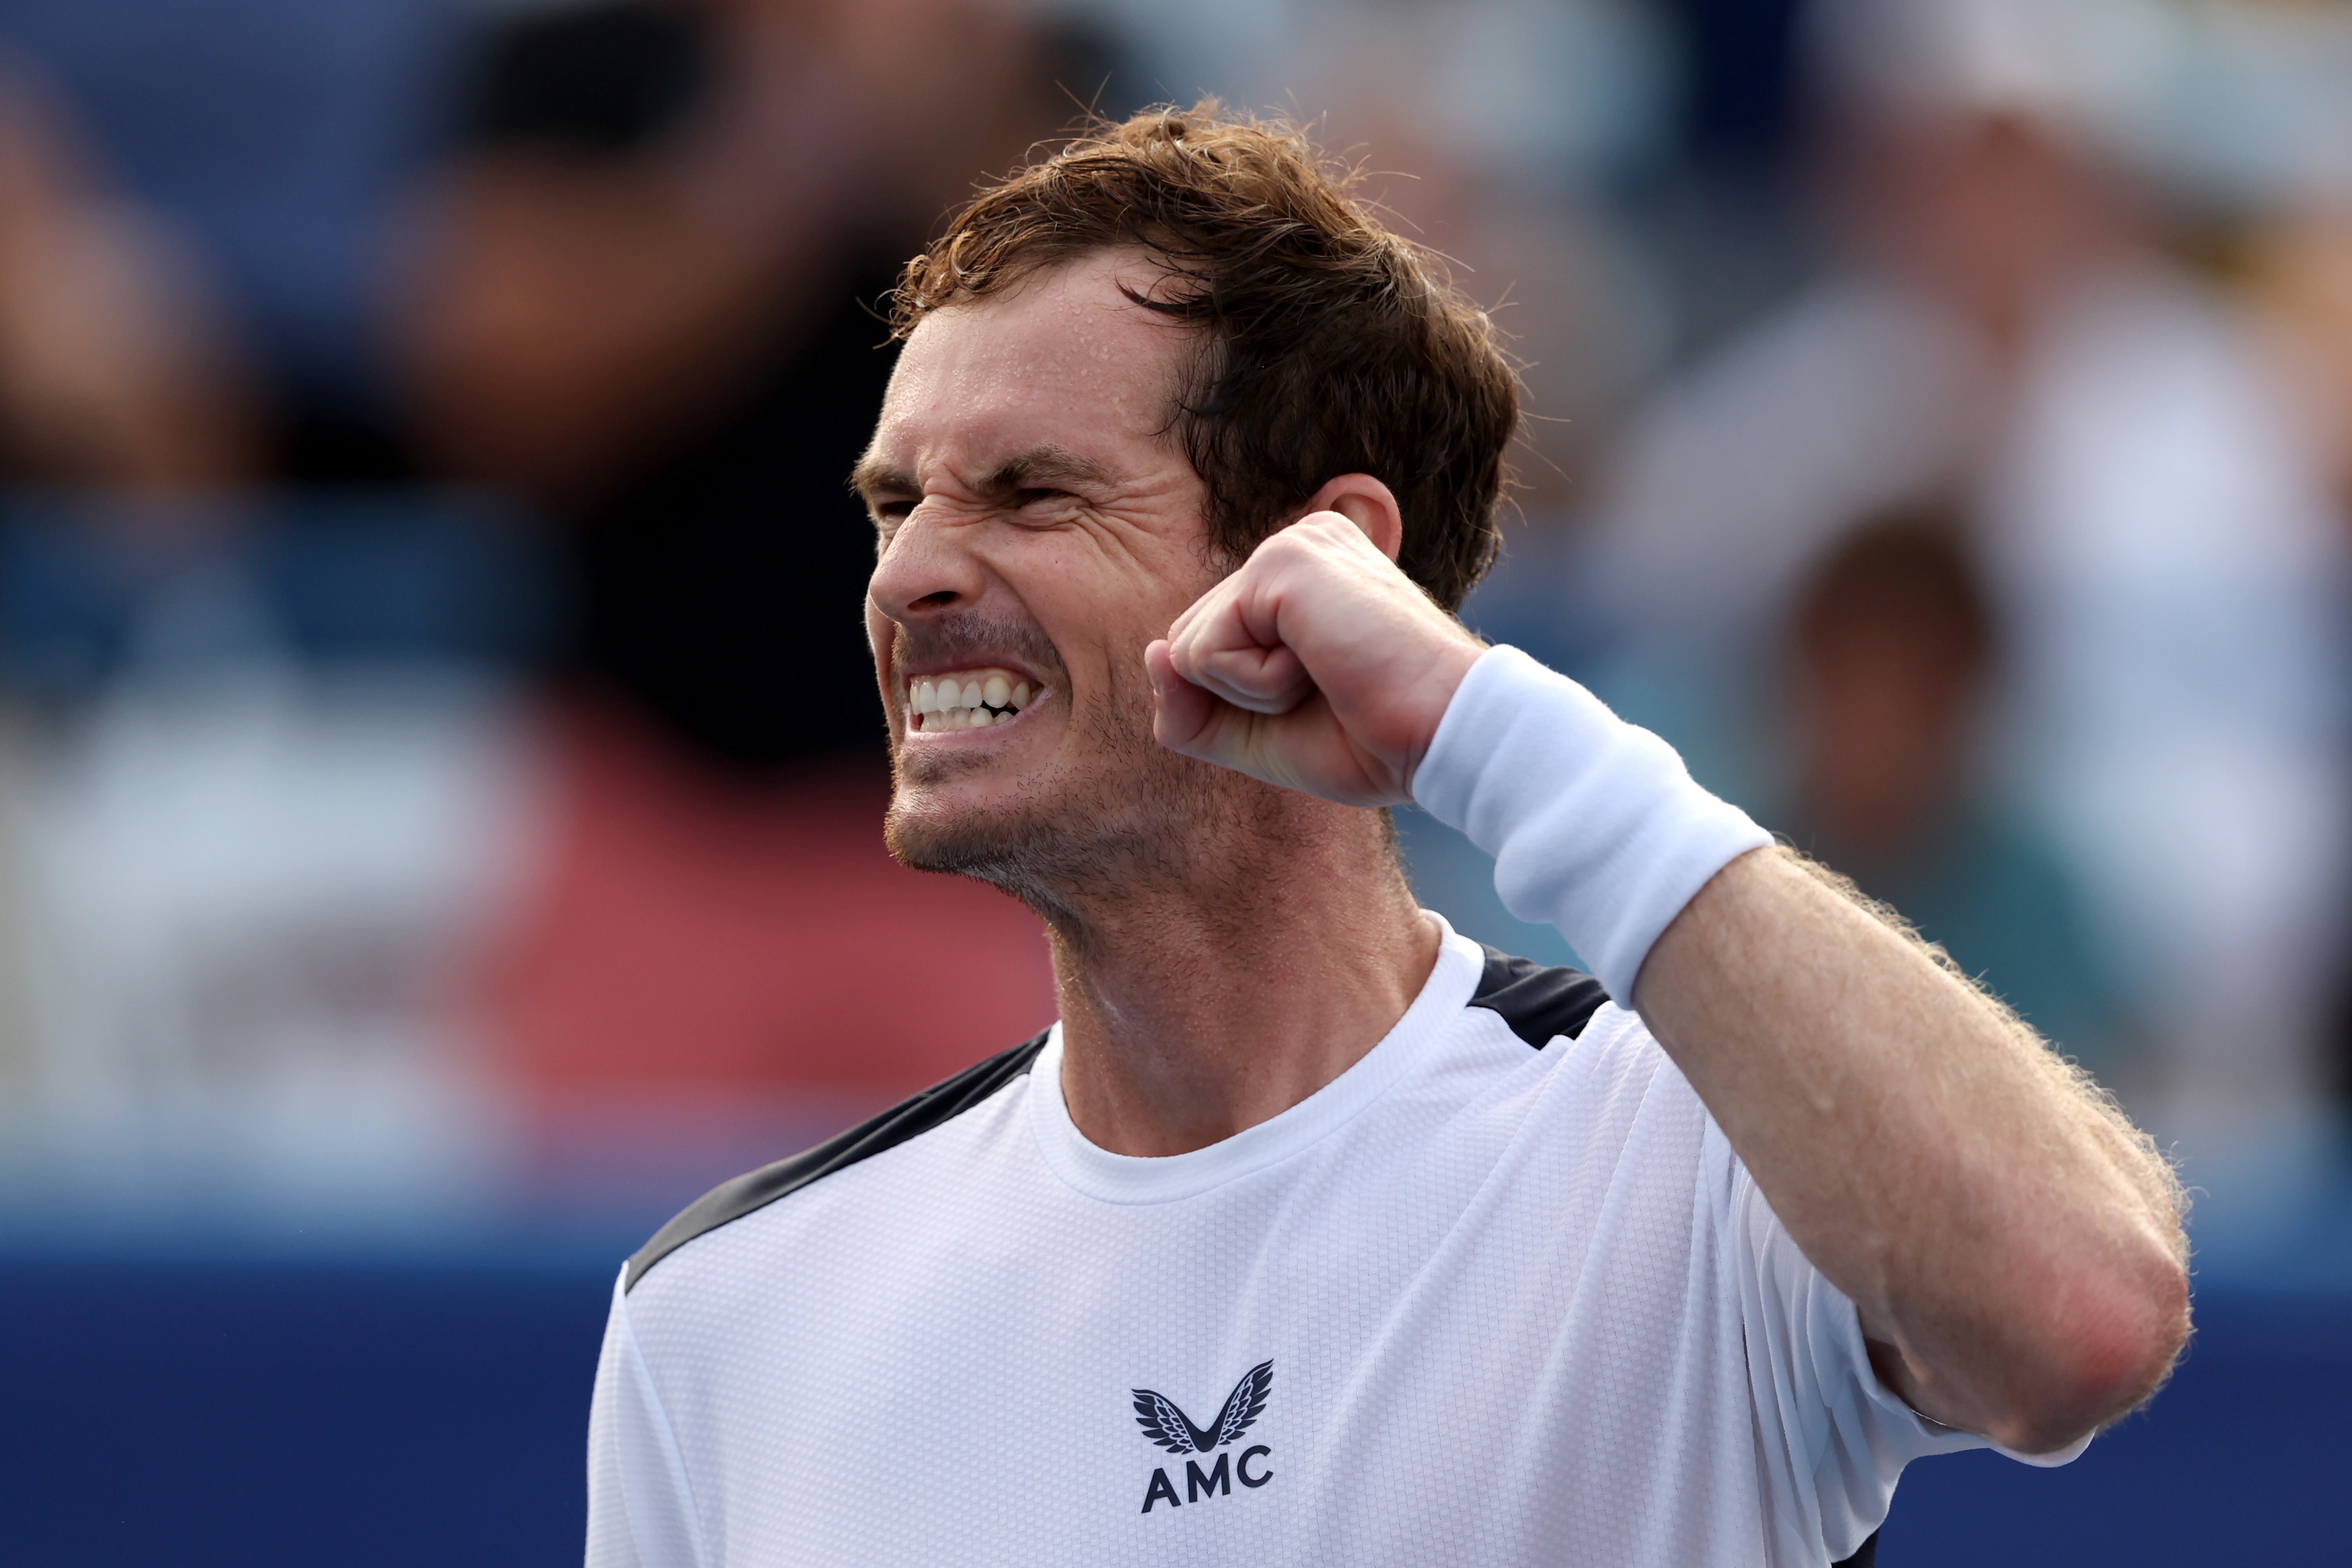 Andy Murray advanced at the Citi Open in Washington